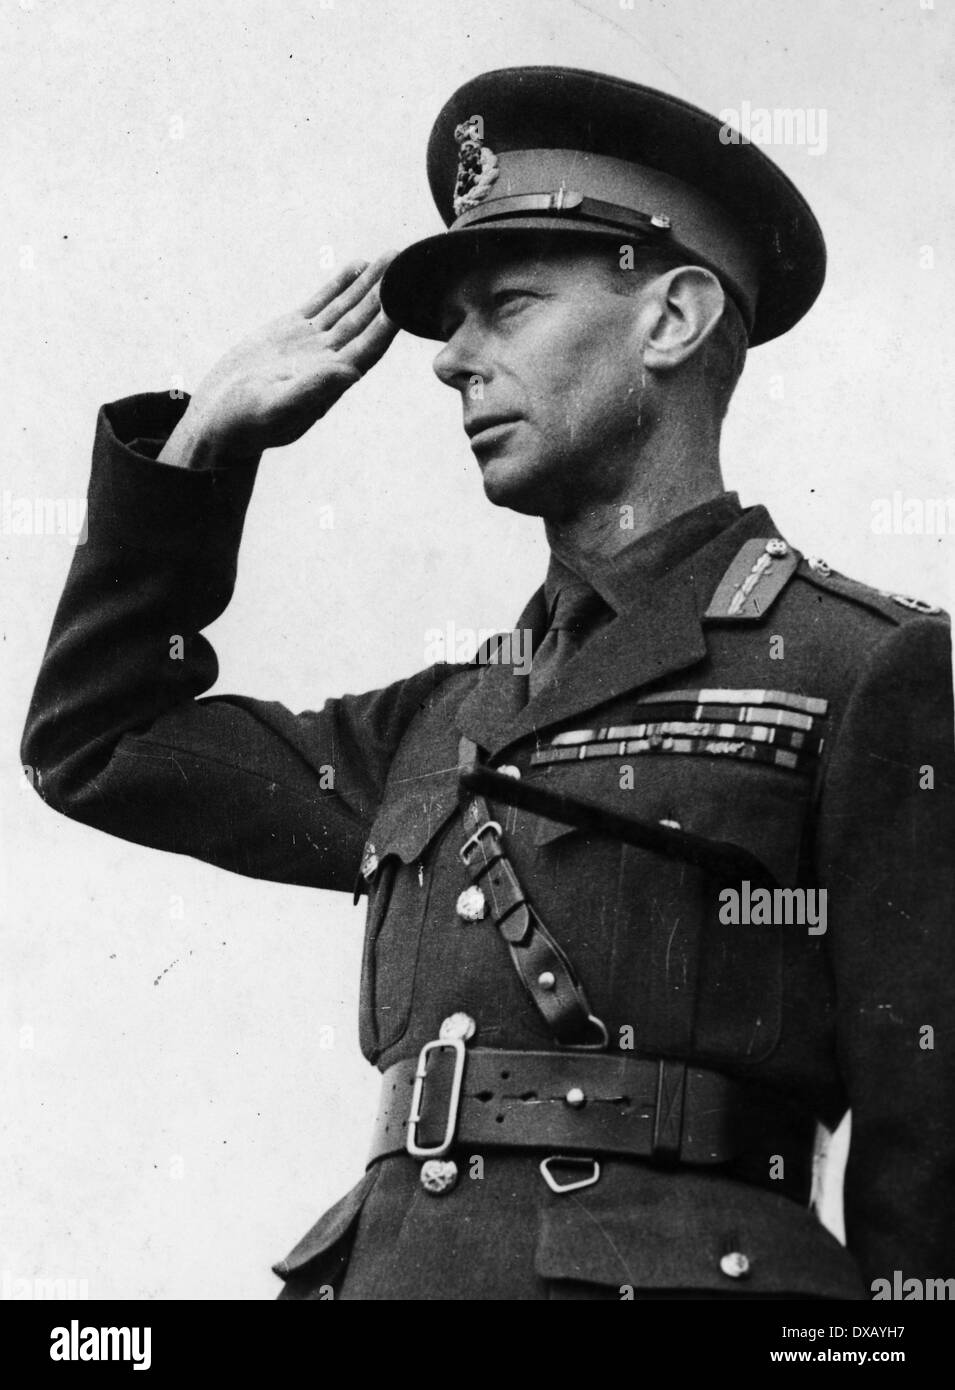 His majesty king George sixth during world war two. Stock Photo